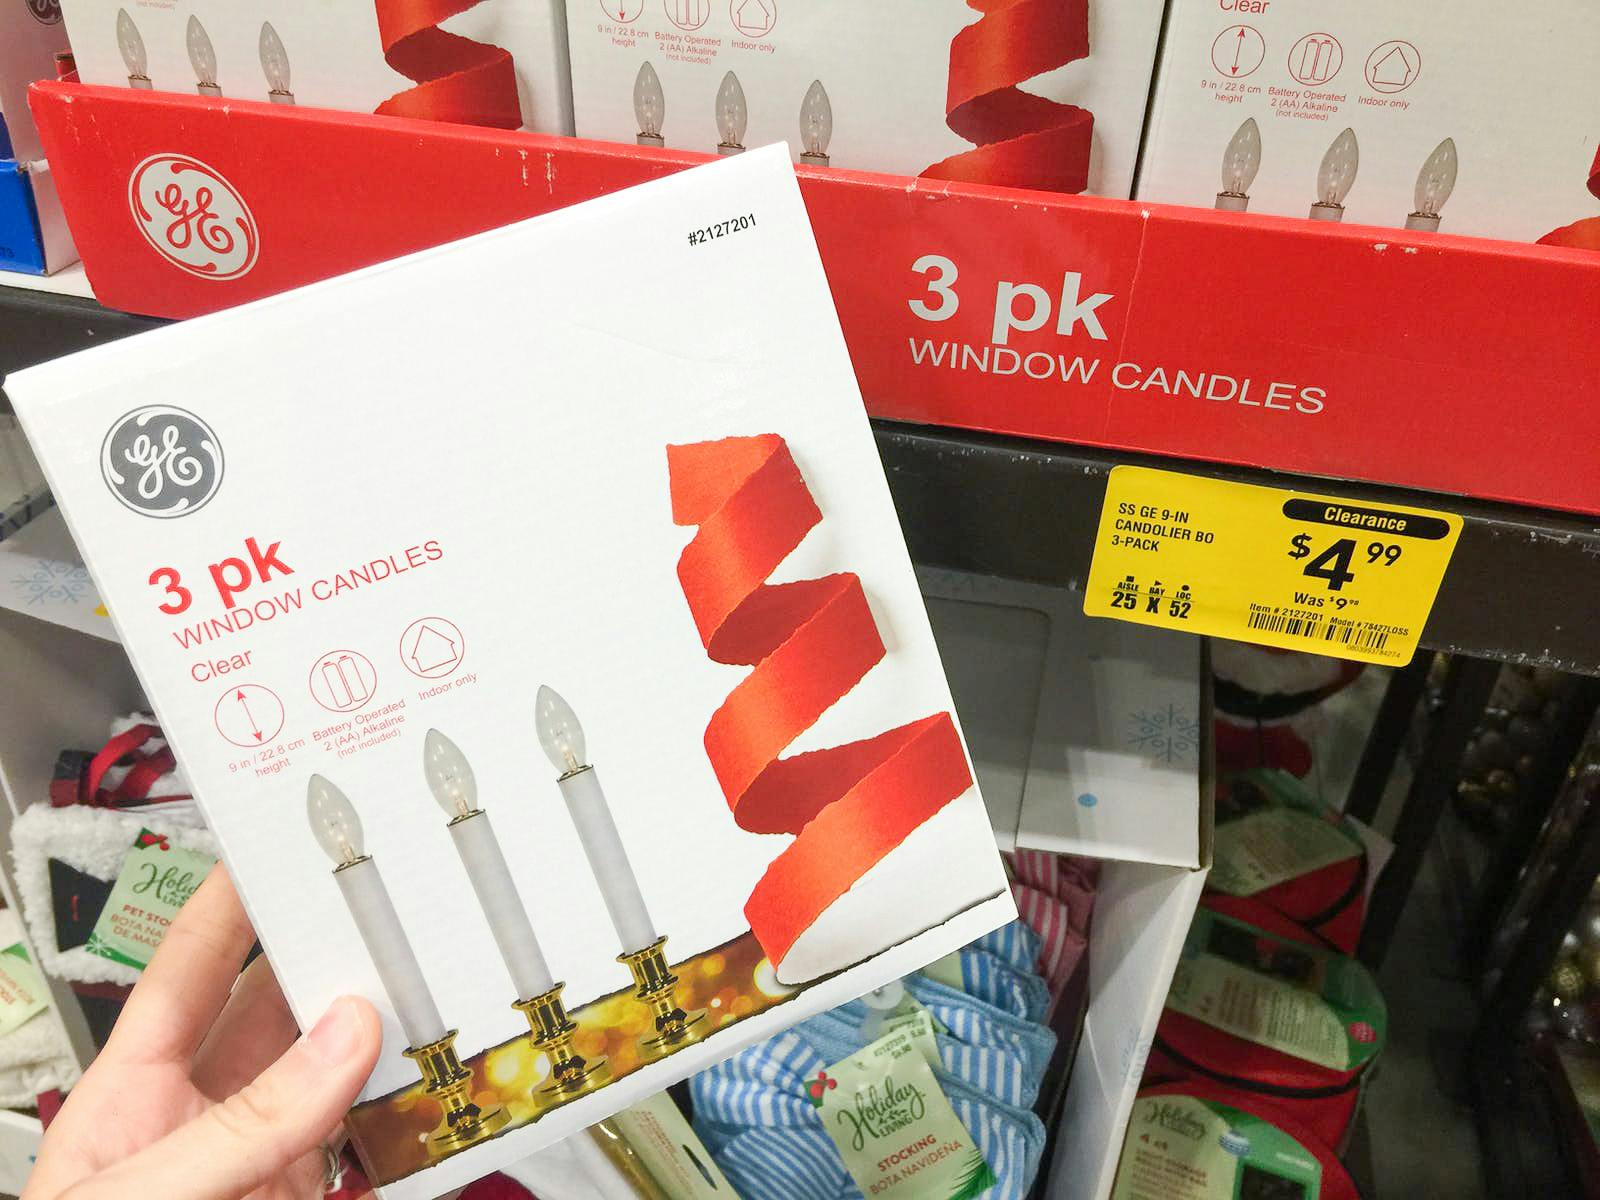 3 pack of window candles on sale in store at Lowe's christmas clearance